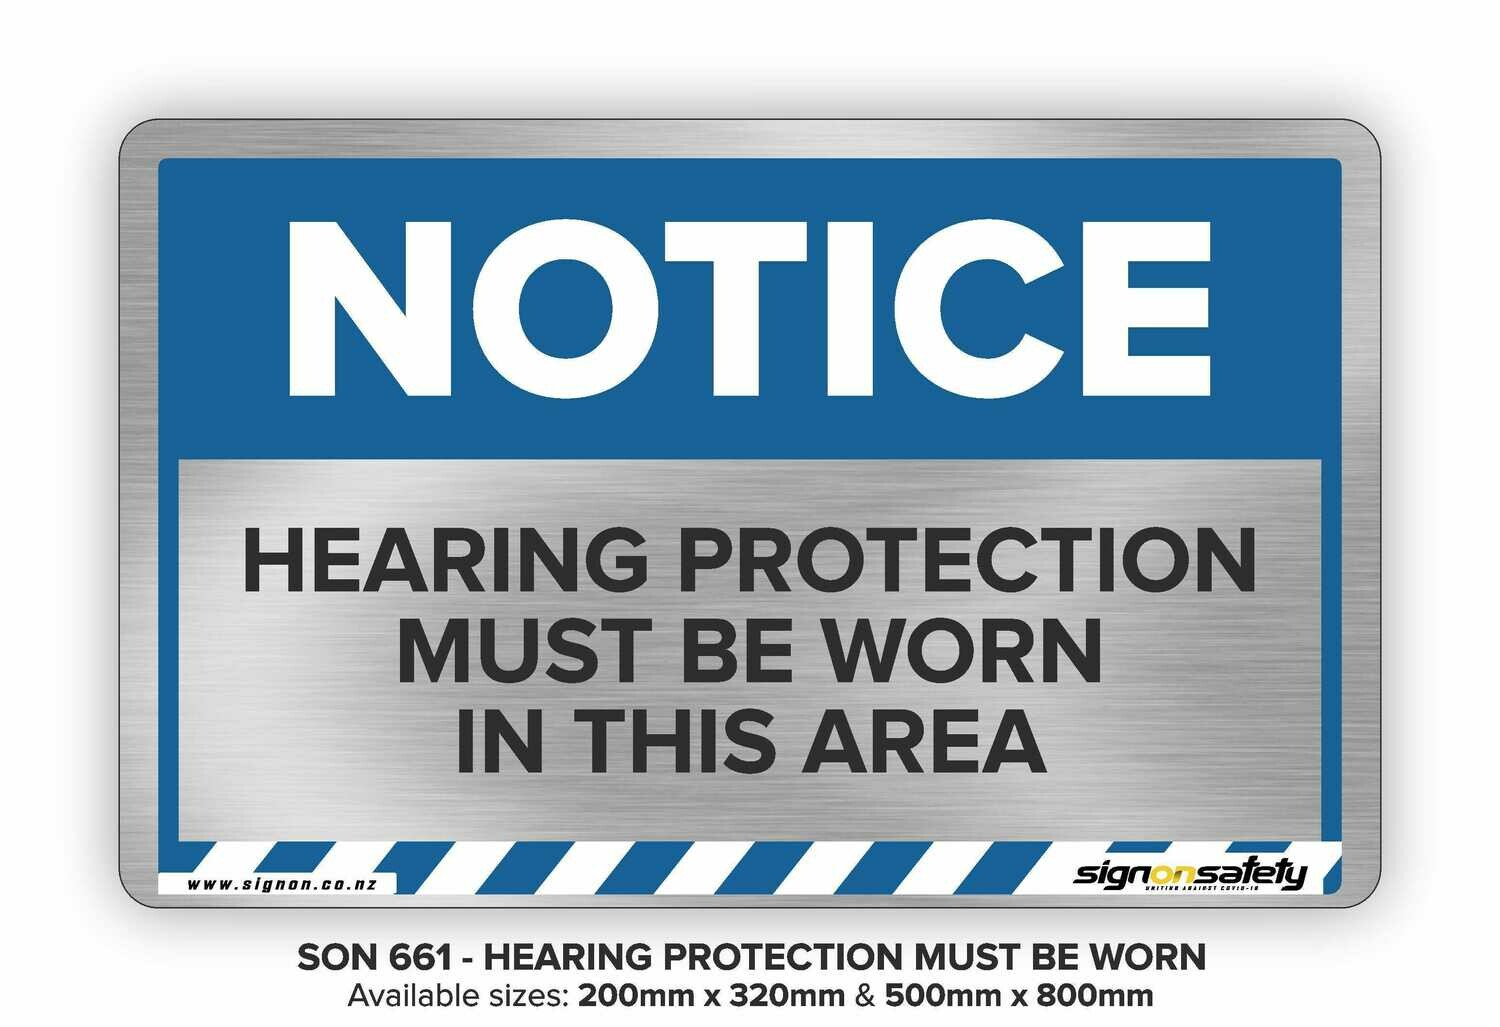 Notice - Hearing Protection Must Be Worn